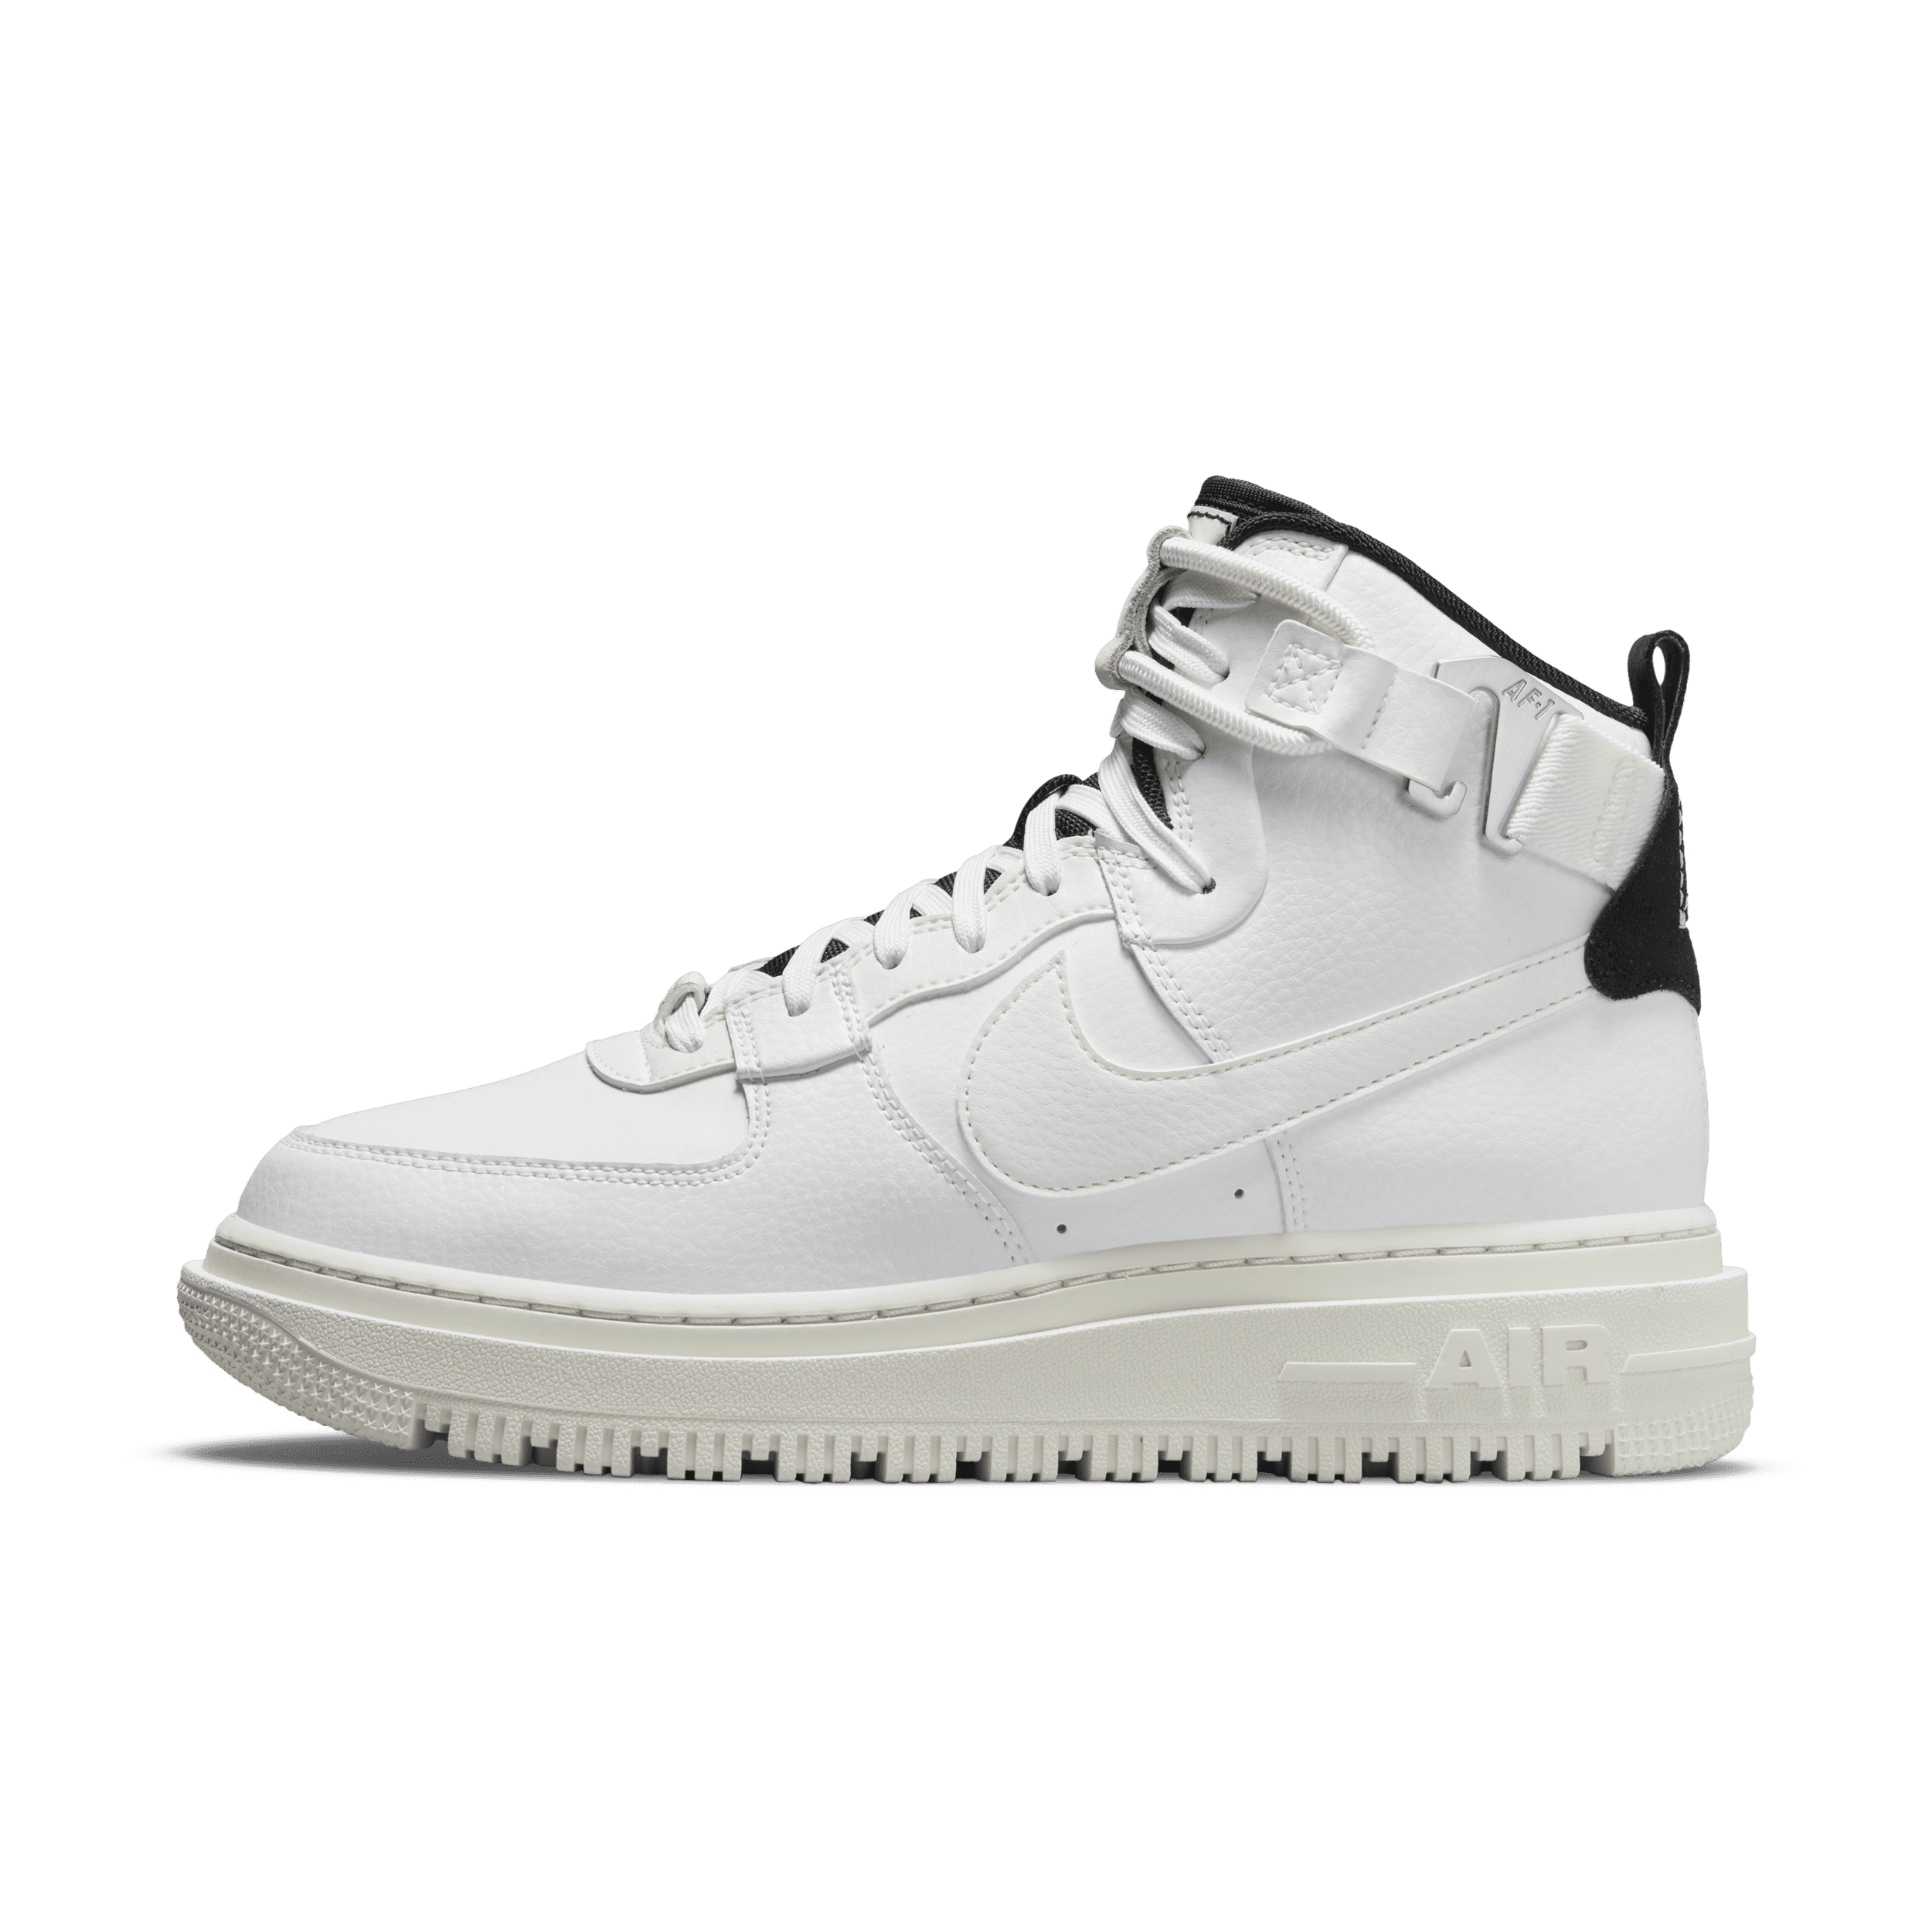 Nike Air Force 1 High Utility 2.0 Damesboots - Wit